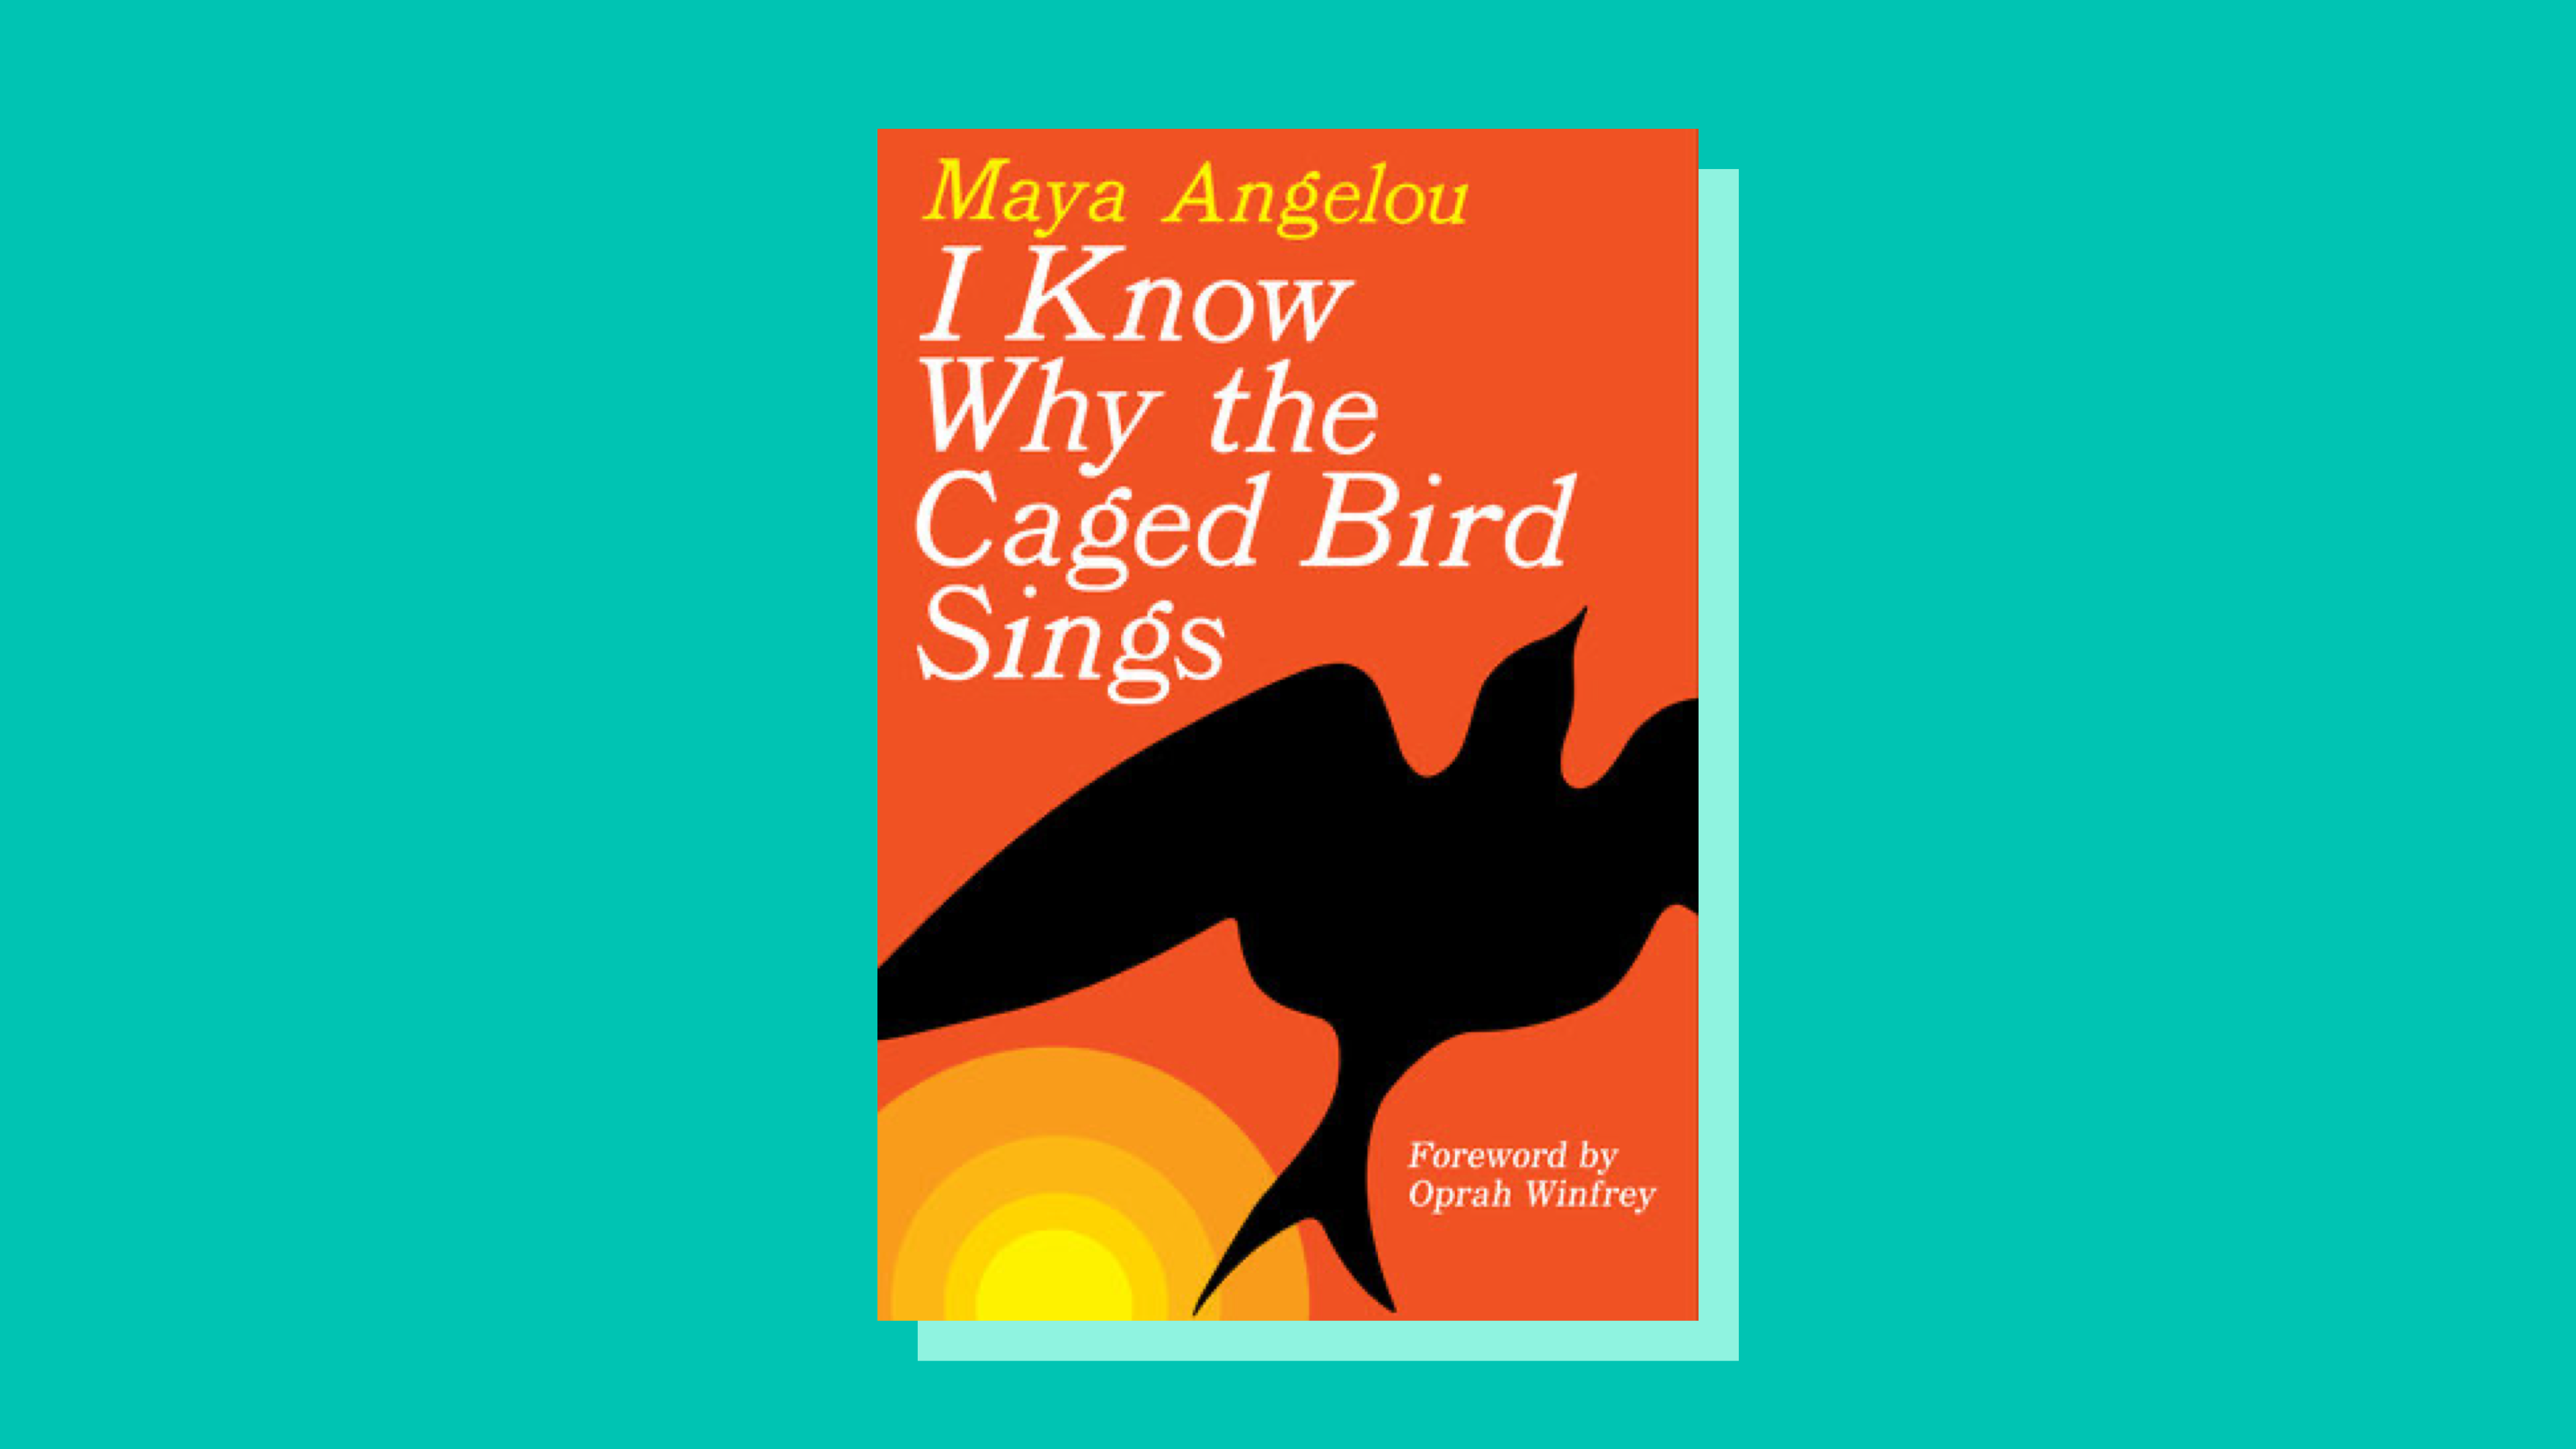 “I Know Why the Caged Bird Sings” by Maya Angelou